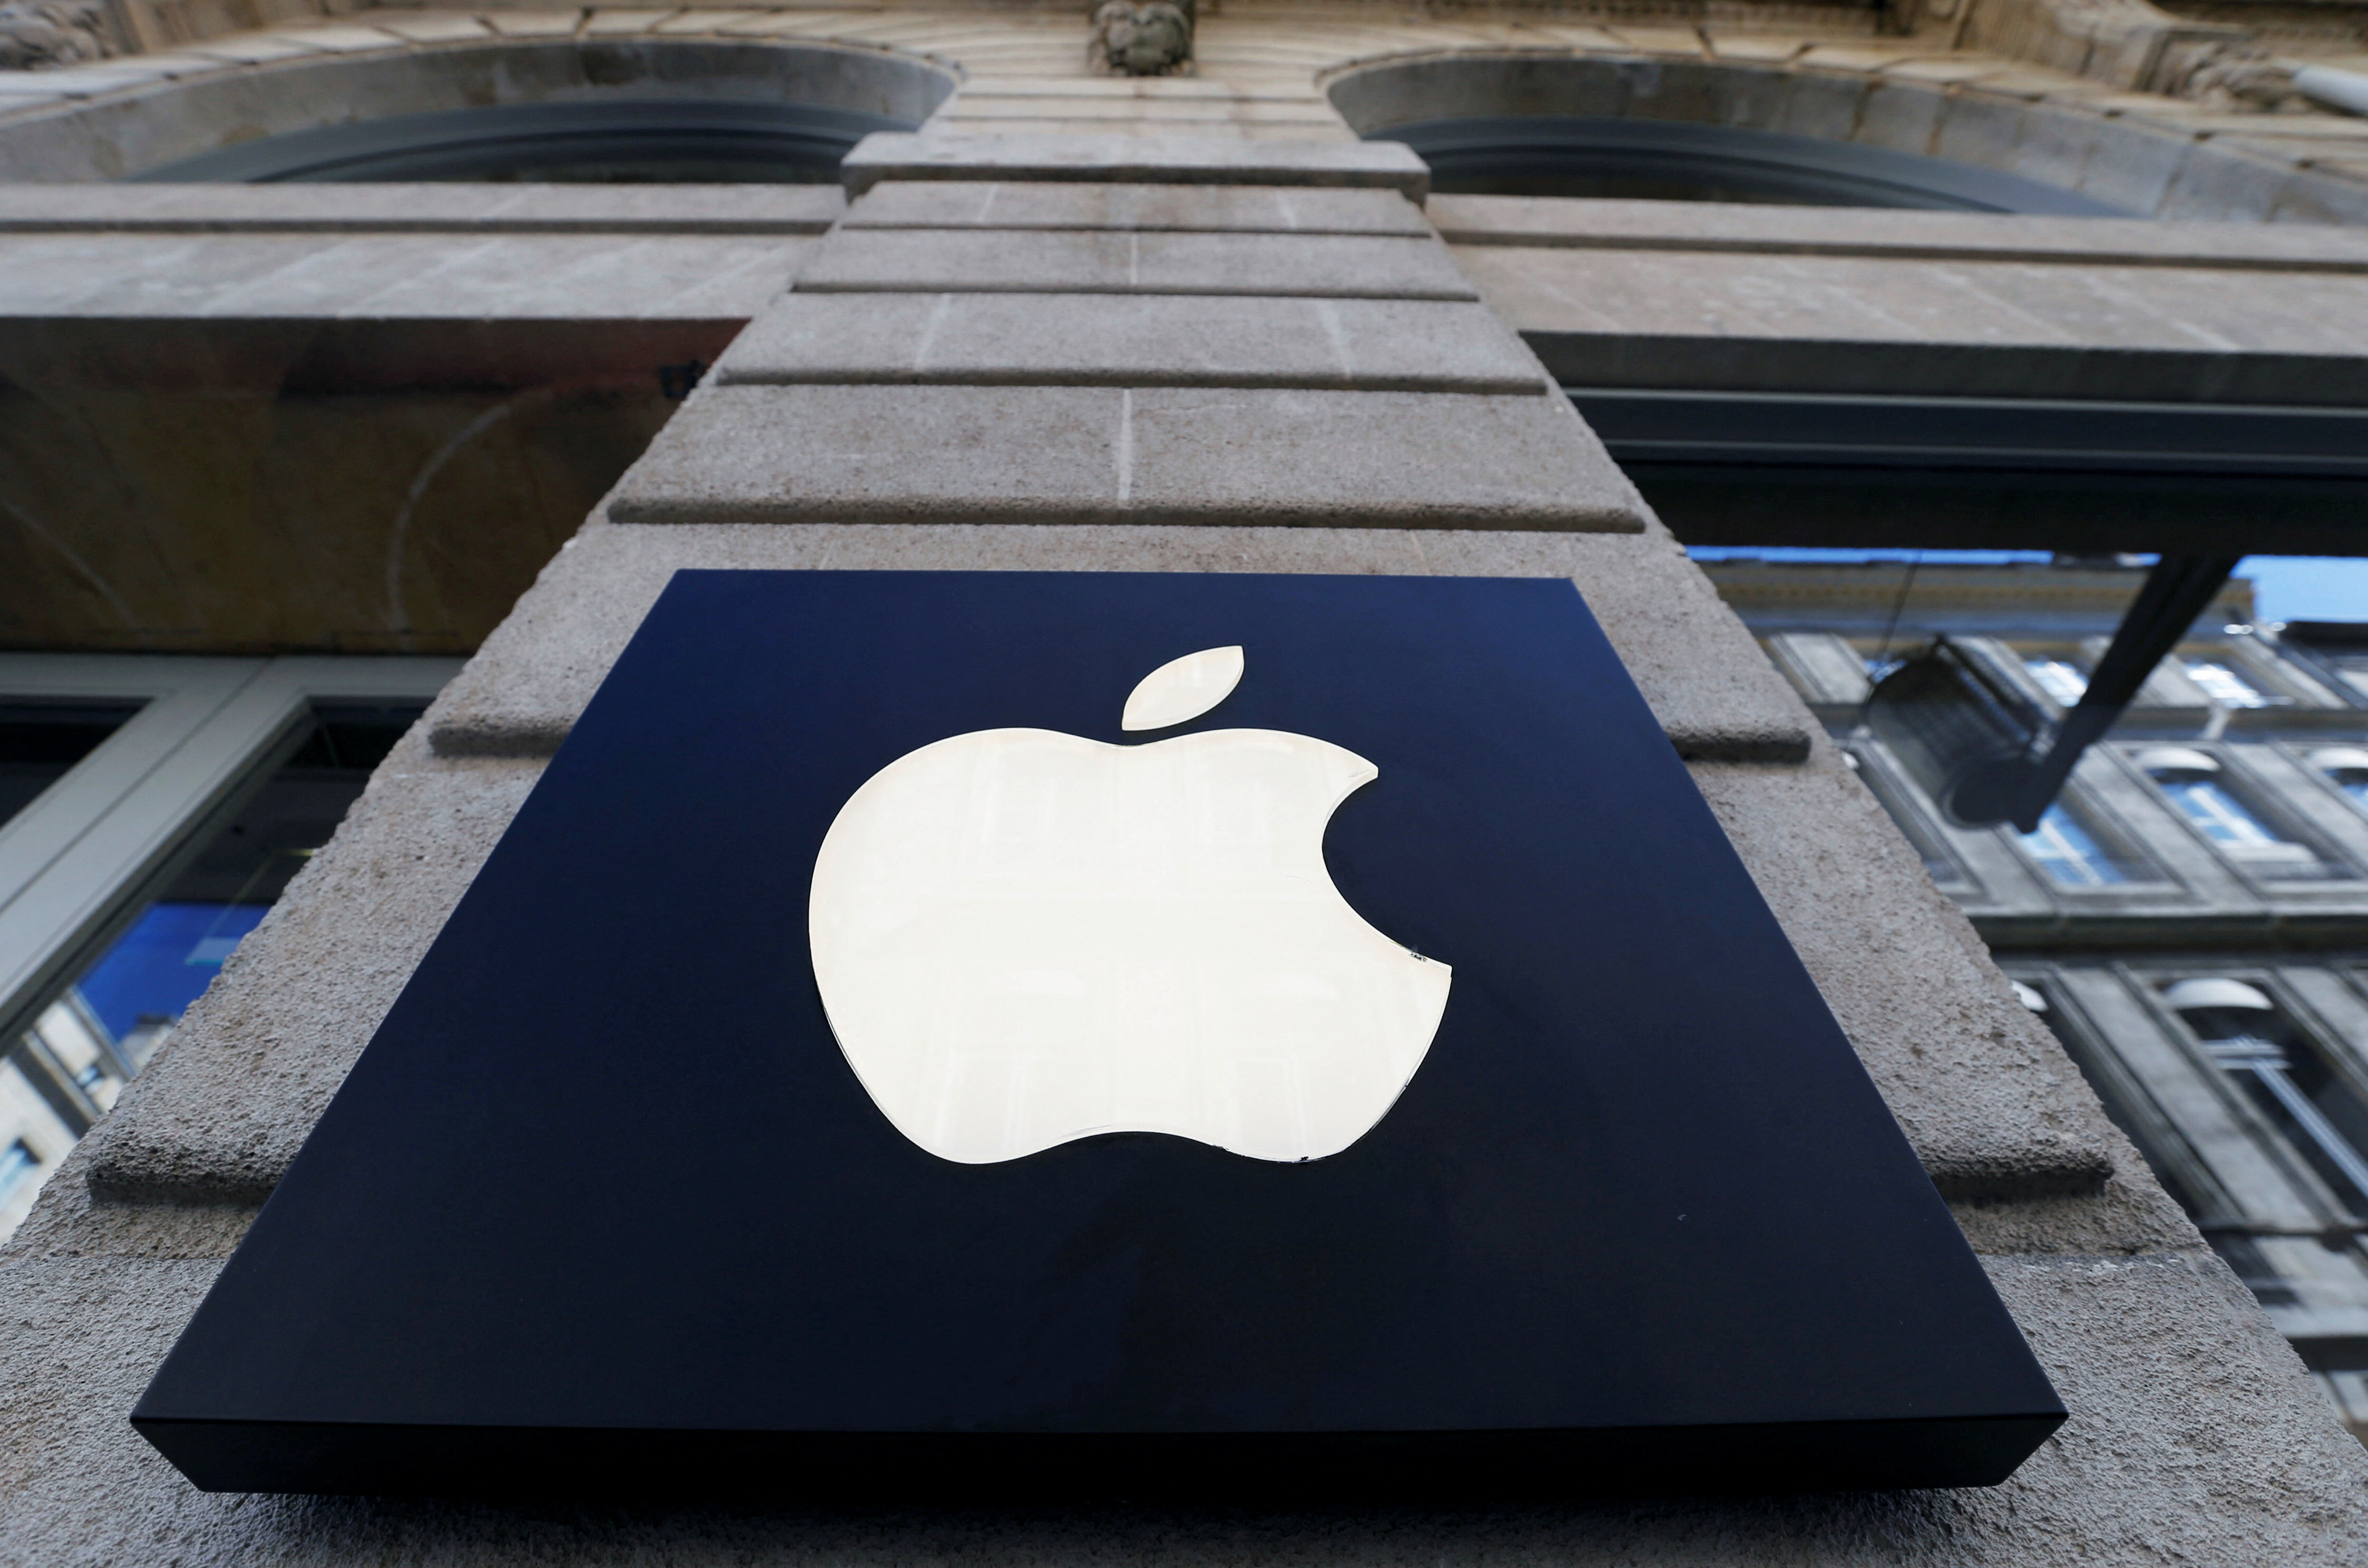 The Apple logo can be seen outside the Bordeaux Apple store.